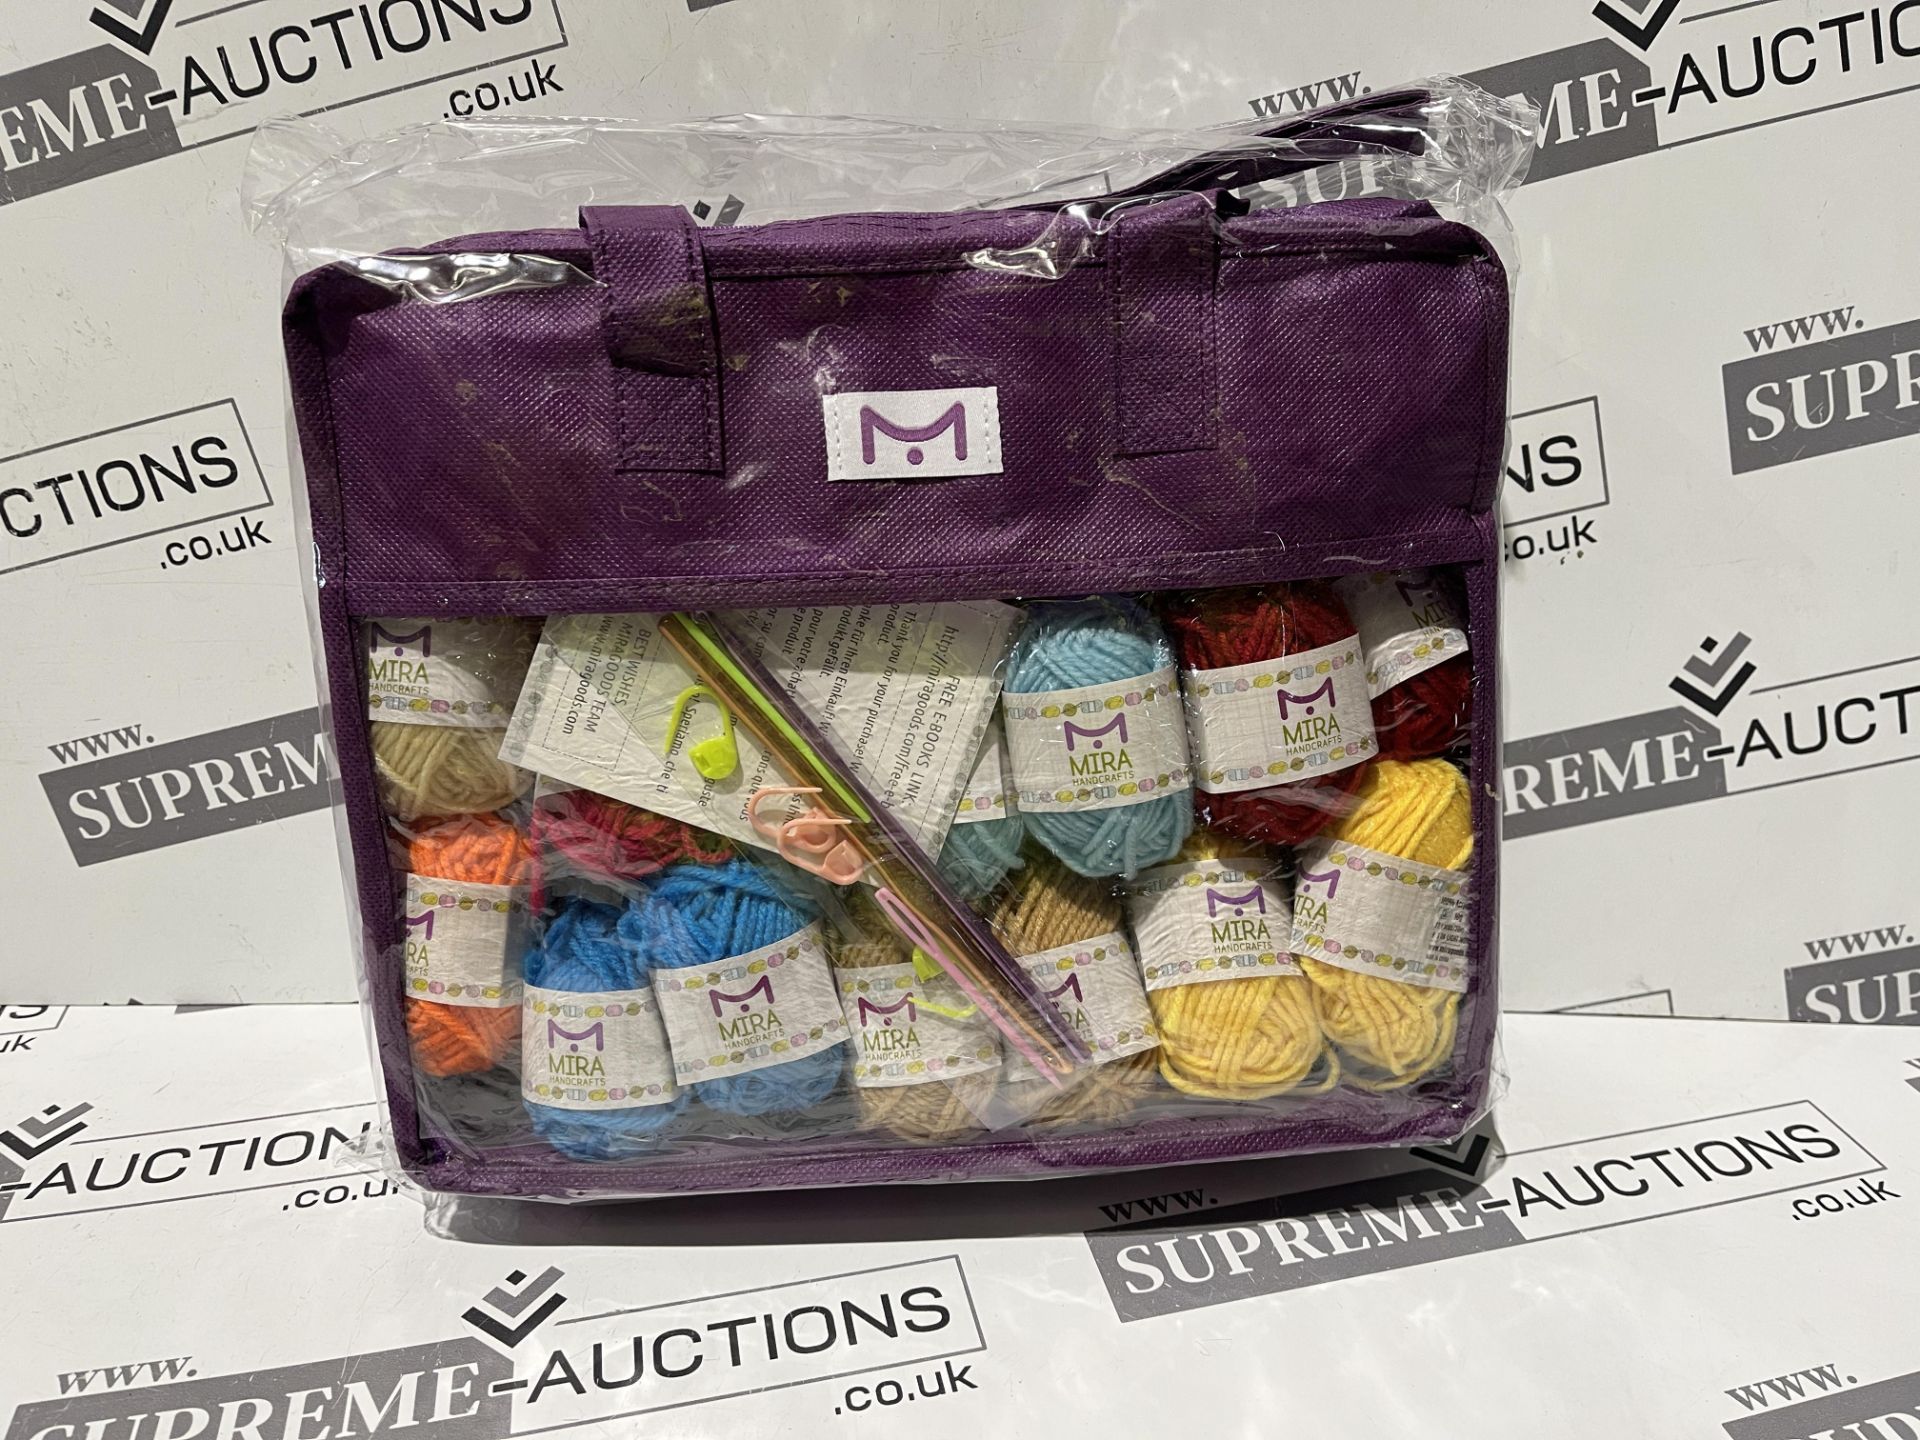 9 X BRAND NEW MIRA HANDICRAFTS PACKS OF YARN AND ACCESSORIES IN CARRY BAG R3-6